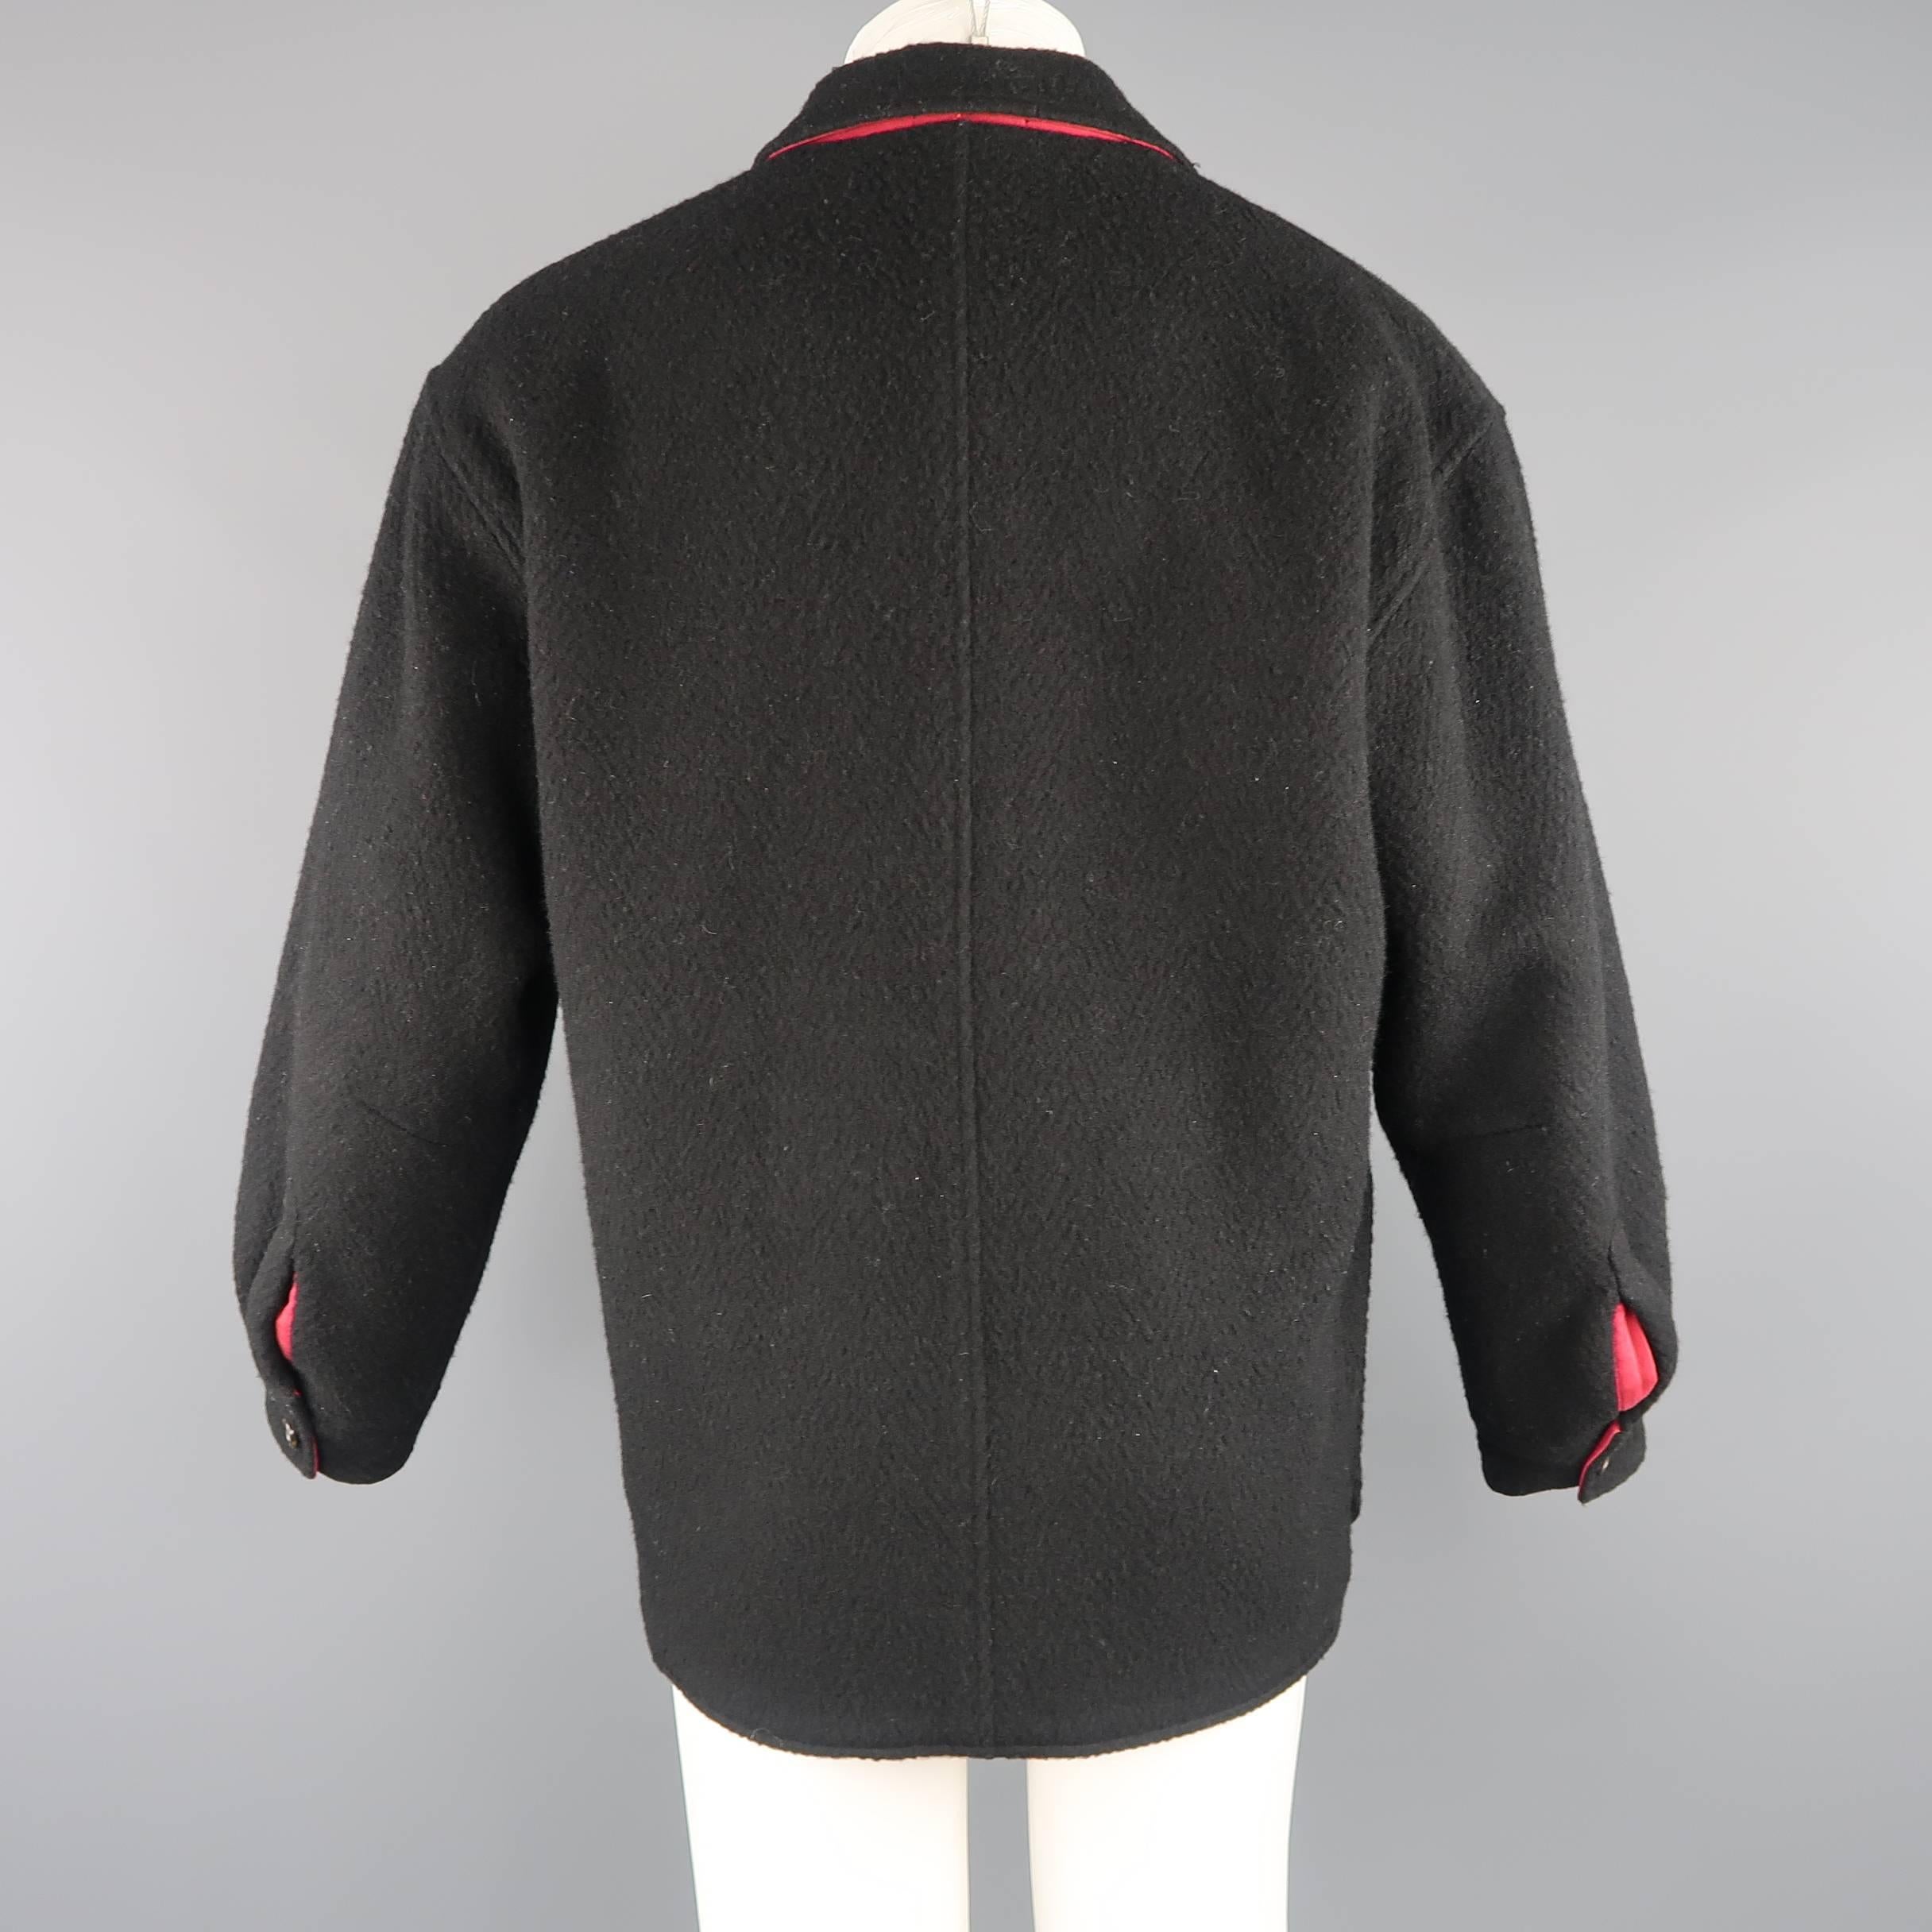 Men's COMME des GARCONS M Textured Black Wool & Red Twill Reversible Jacket 2